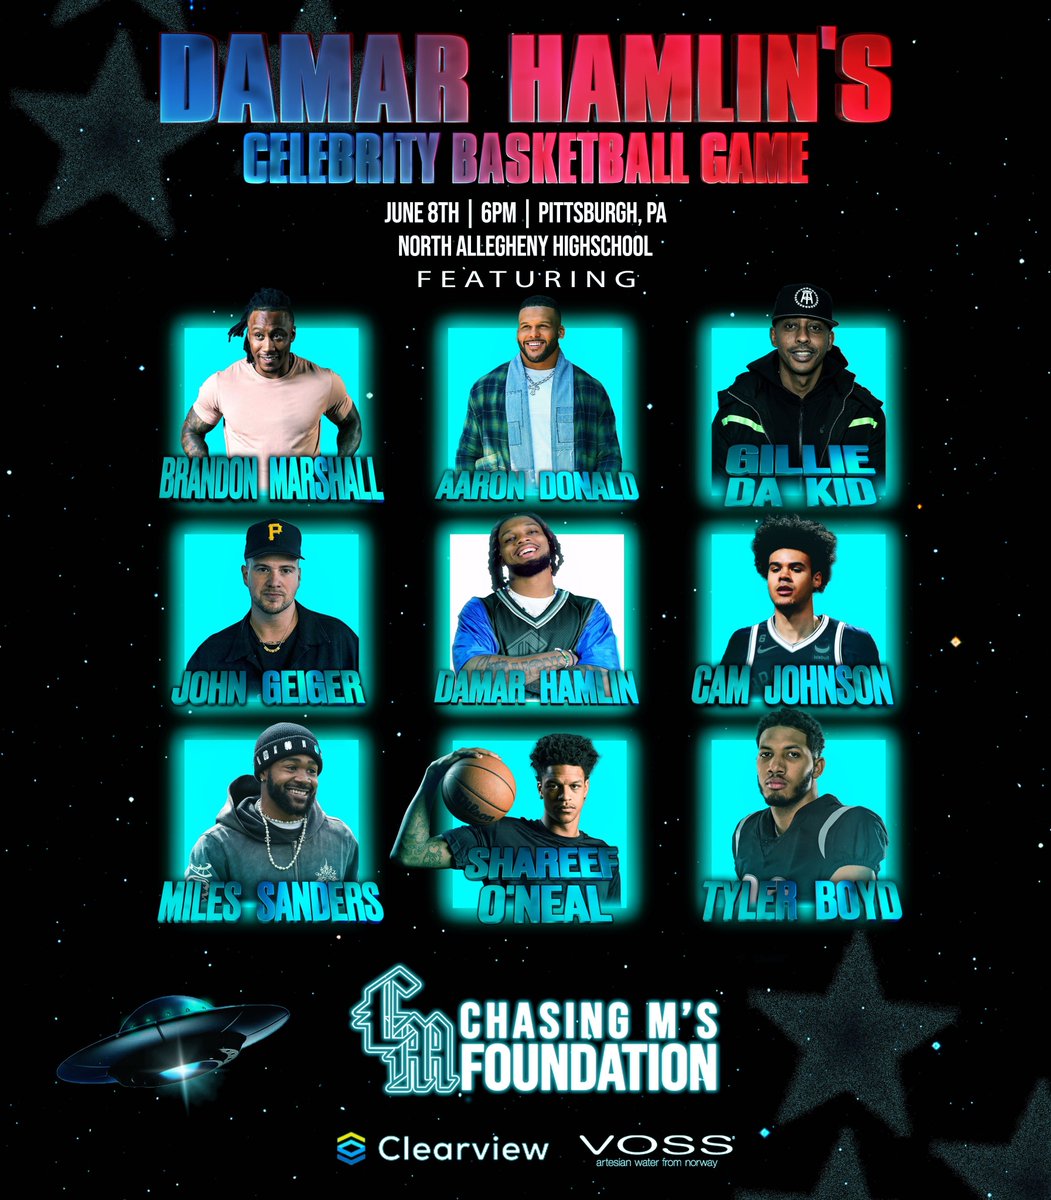 Pittsburgh people!! We are having the Damar Hamlin Celebrity Basketball Game on June 8th at North Allegheny High School. $10 tickets online. $25 at the door. Tickets here: eventbrite.com/e/chasing-ms-c…